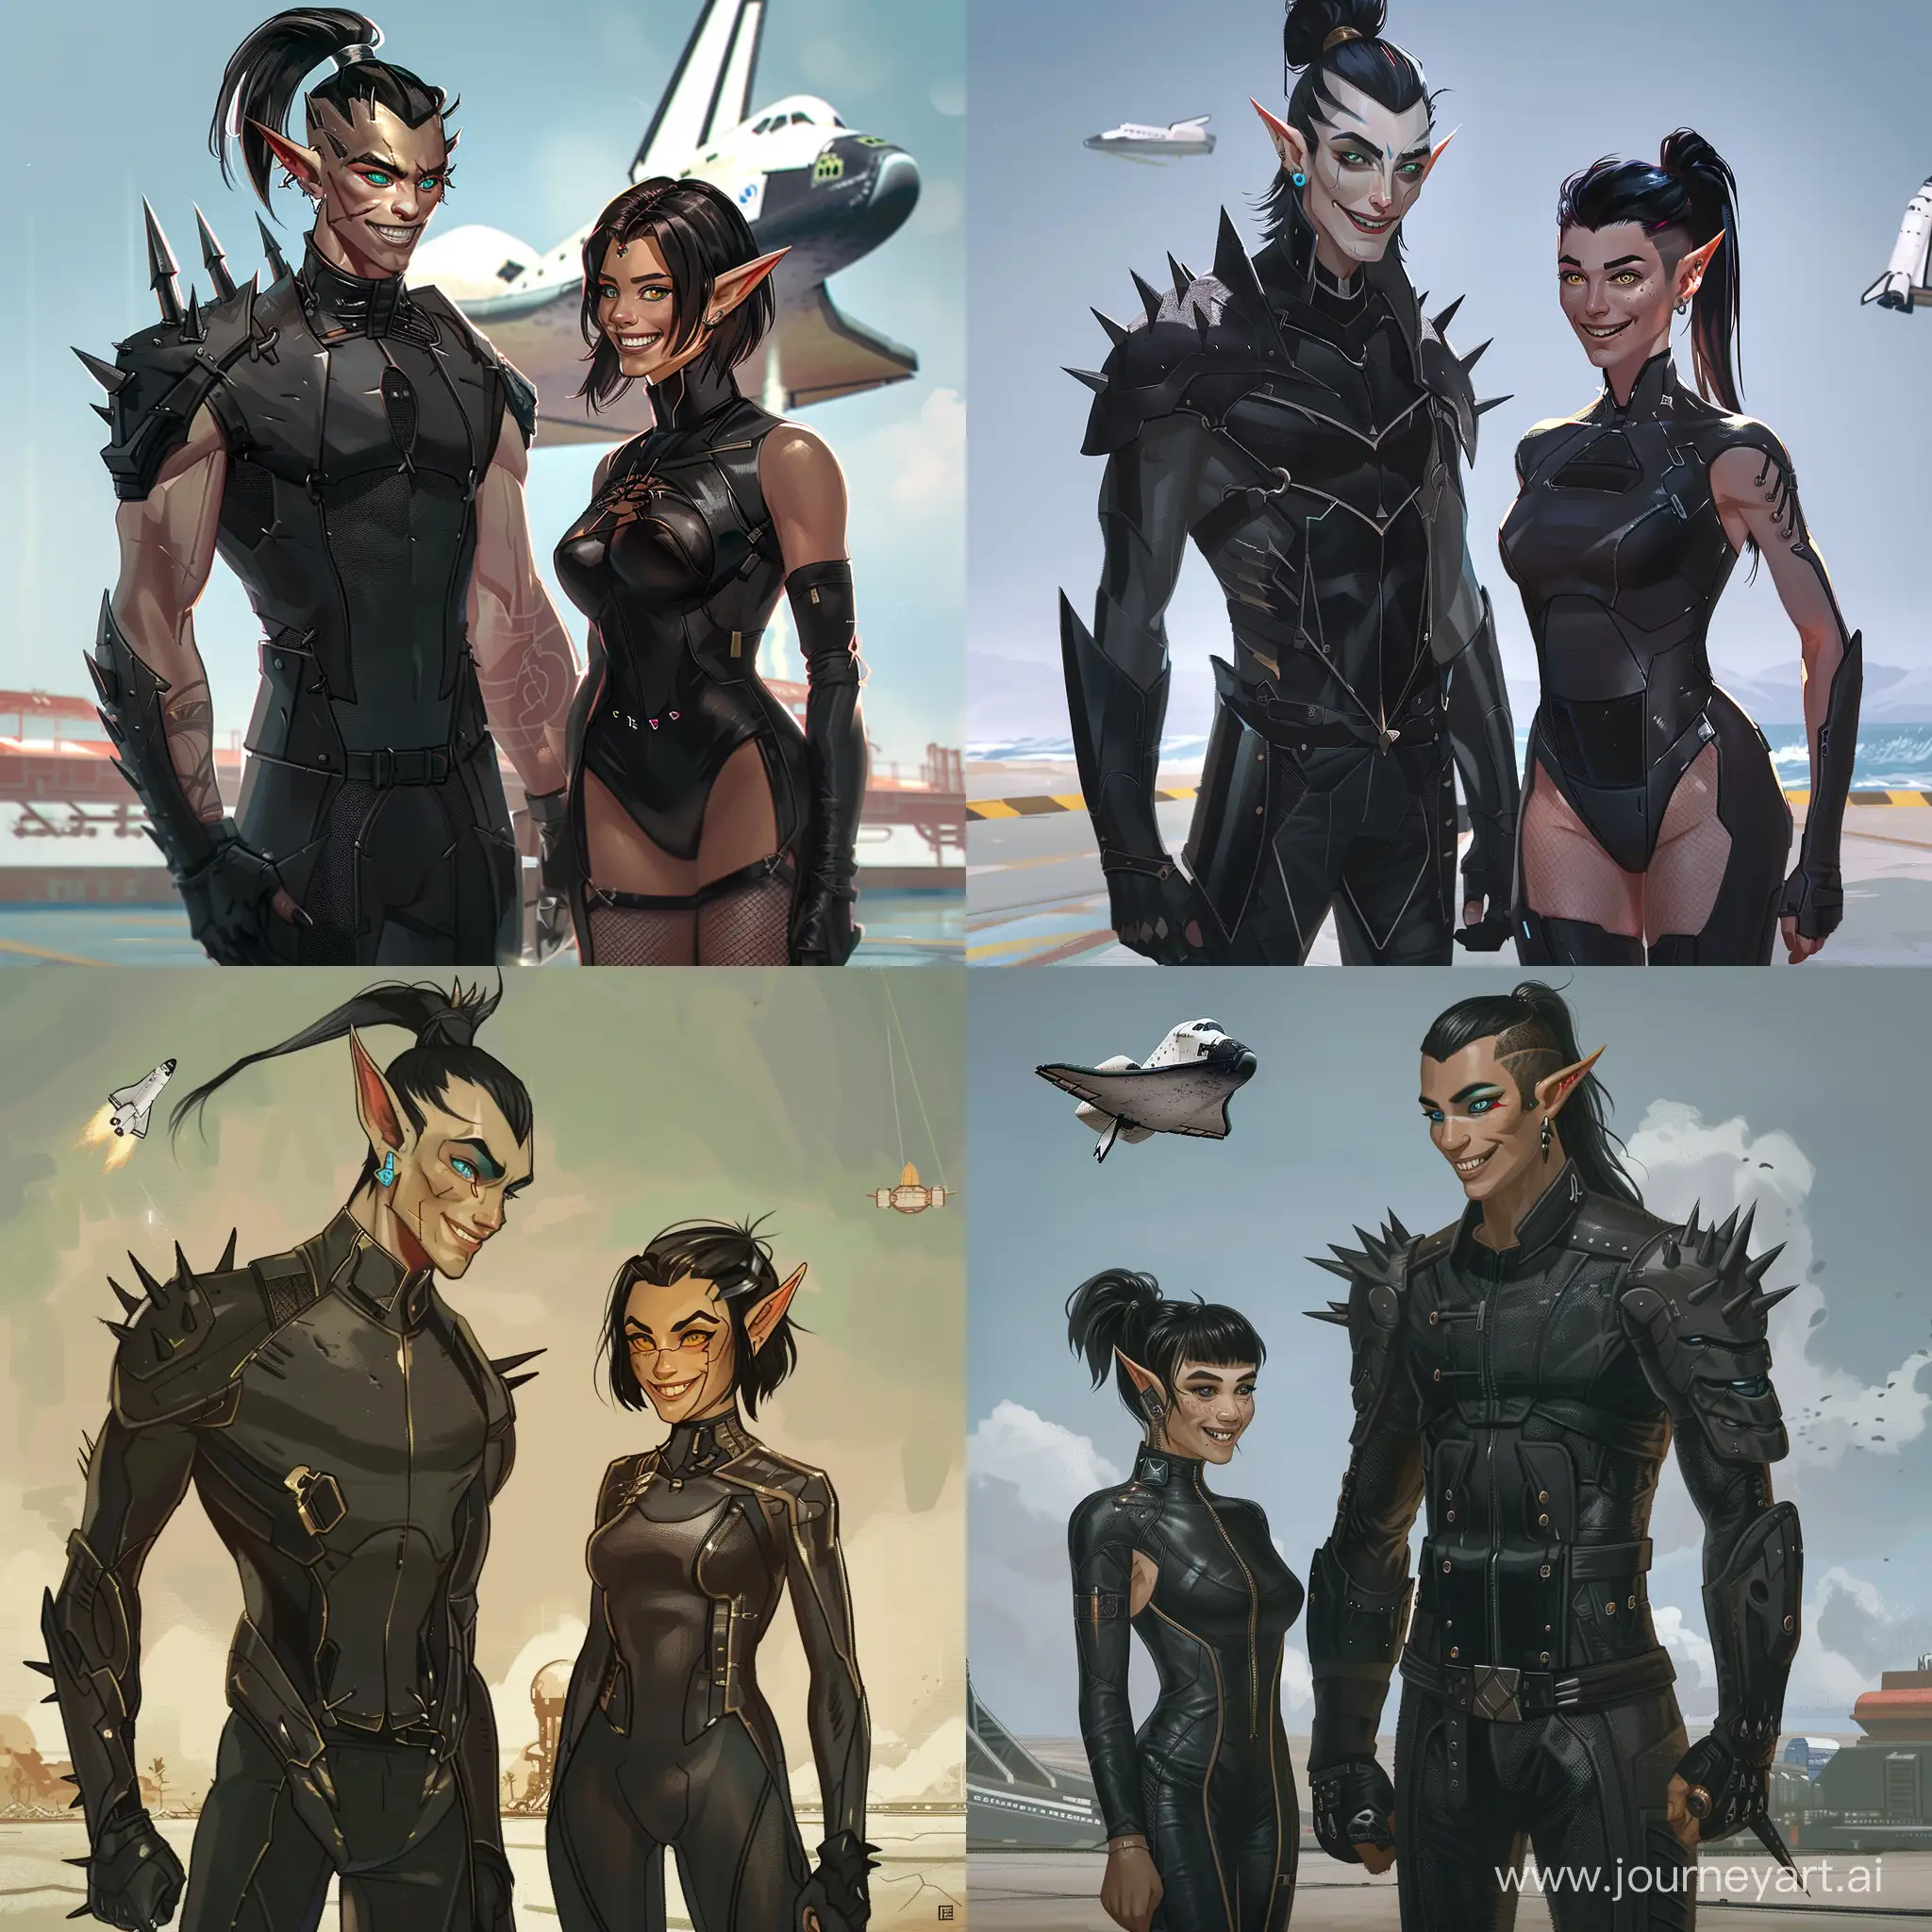 Two characters. A tall, pale, thin elven man, his black hair is tied into a high ponytail on top of his head, he wears spiked black armor, he has turquoise eyes, earrings in his pointed ears, and his eyes are painted with red eyeliner. Standing nearby is a muscular woman, human, in a tight-fitting futuristic assassin suit, she's short, she has fair skin, yellow eyes, freckles, she smiles, black short hair, bowl haircut. Space shuttle landing zone in the background